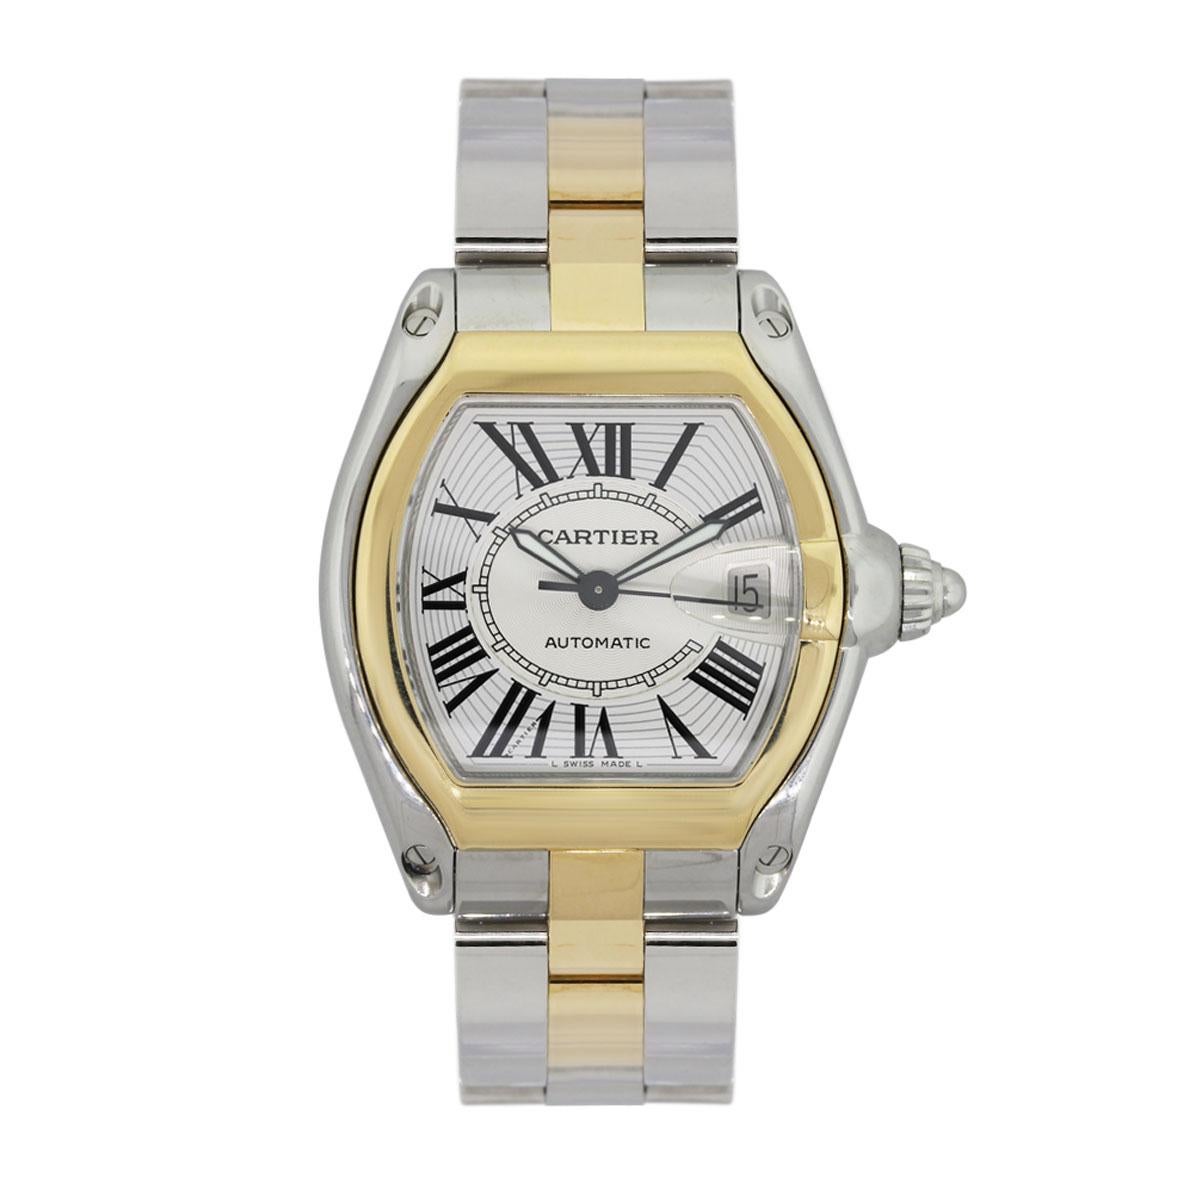 Brand: Cartier
MPN: 2510
Model: Roadster
Case Material: Stainless Steel
Case Diameter: 36mm x 44mm
Crystal: Sapphire crystal
Bezel: 18k yellow gold bezel
Dial: Silver roman dial
Bracelet: Stainless steel and 18k yellow gold
Size: Will fit a 6.5″